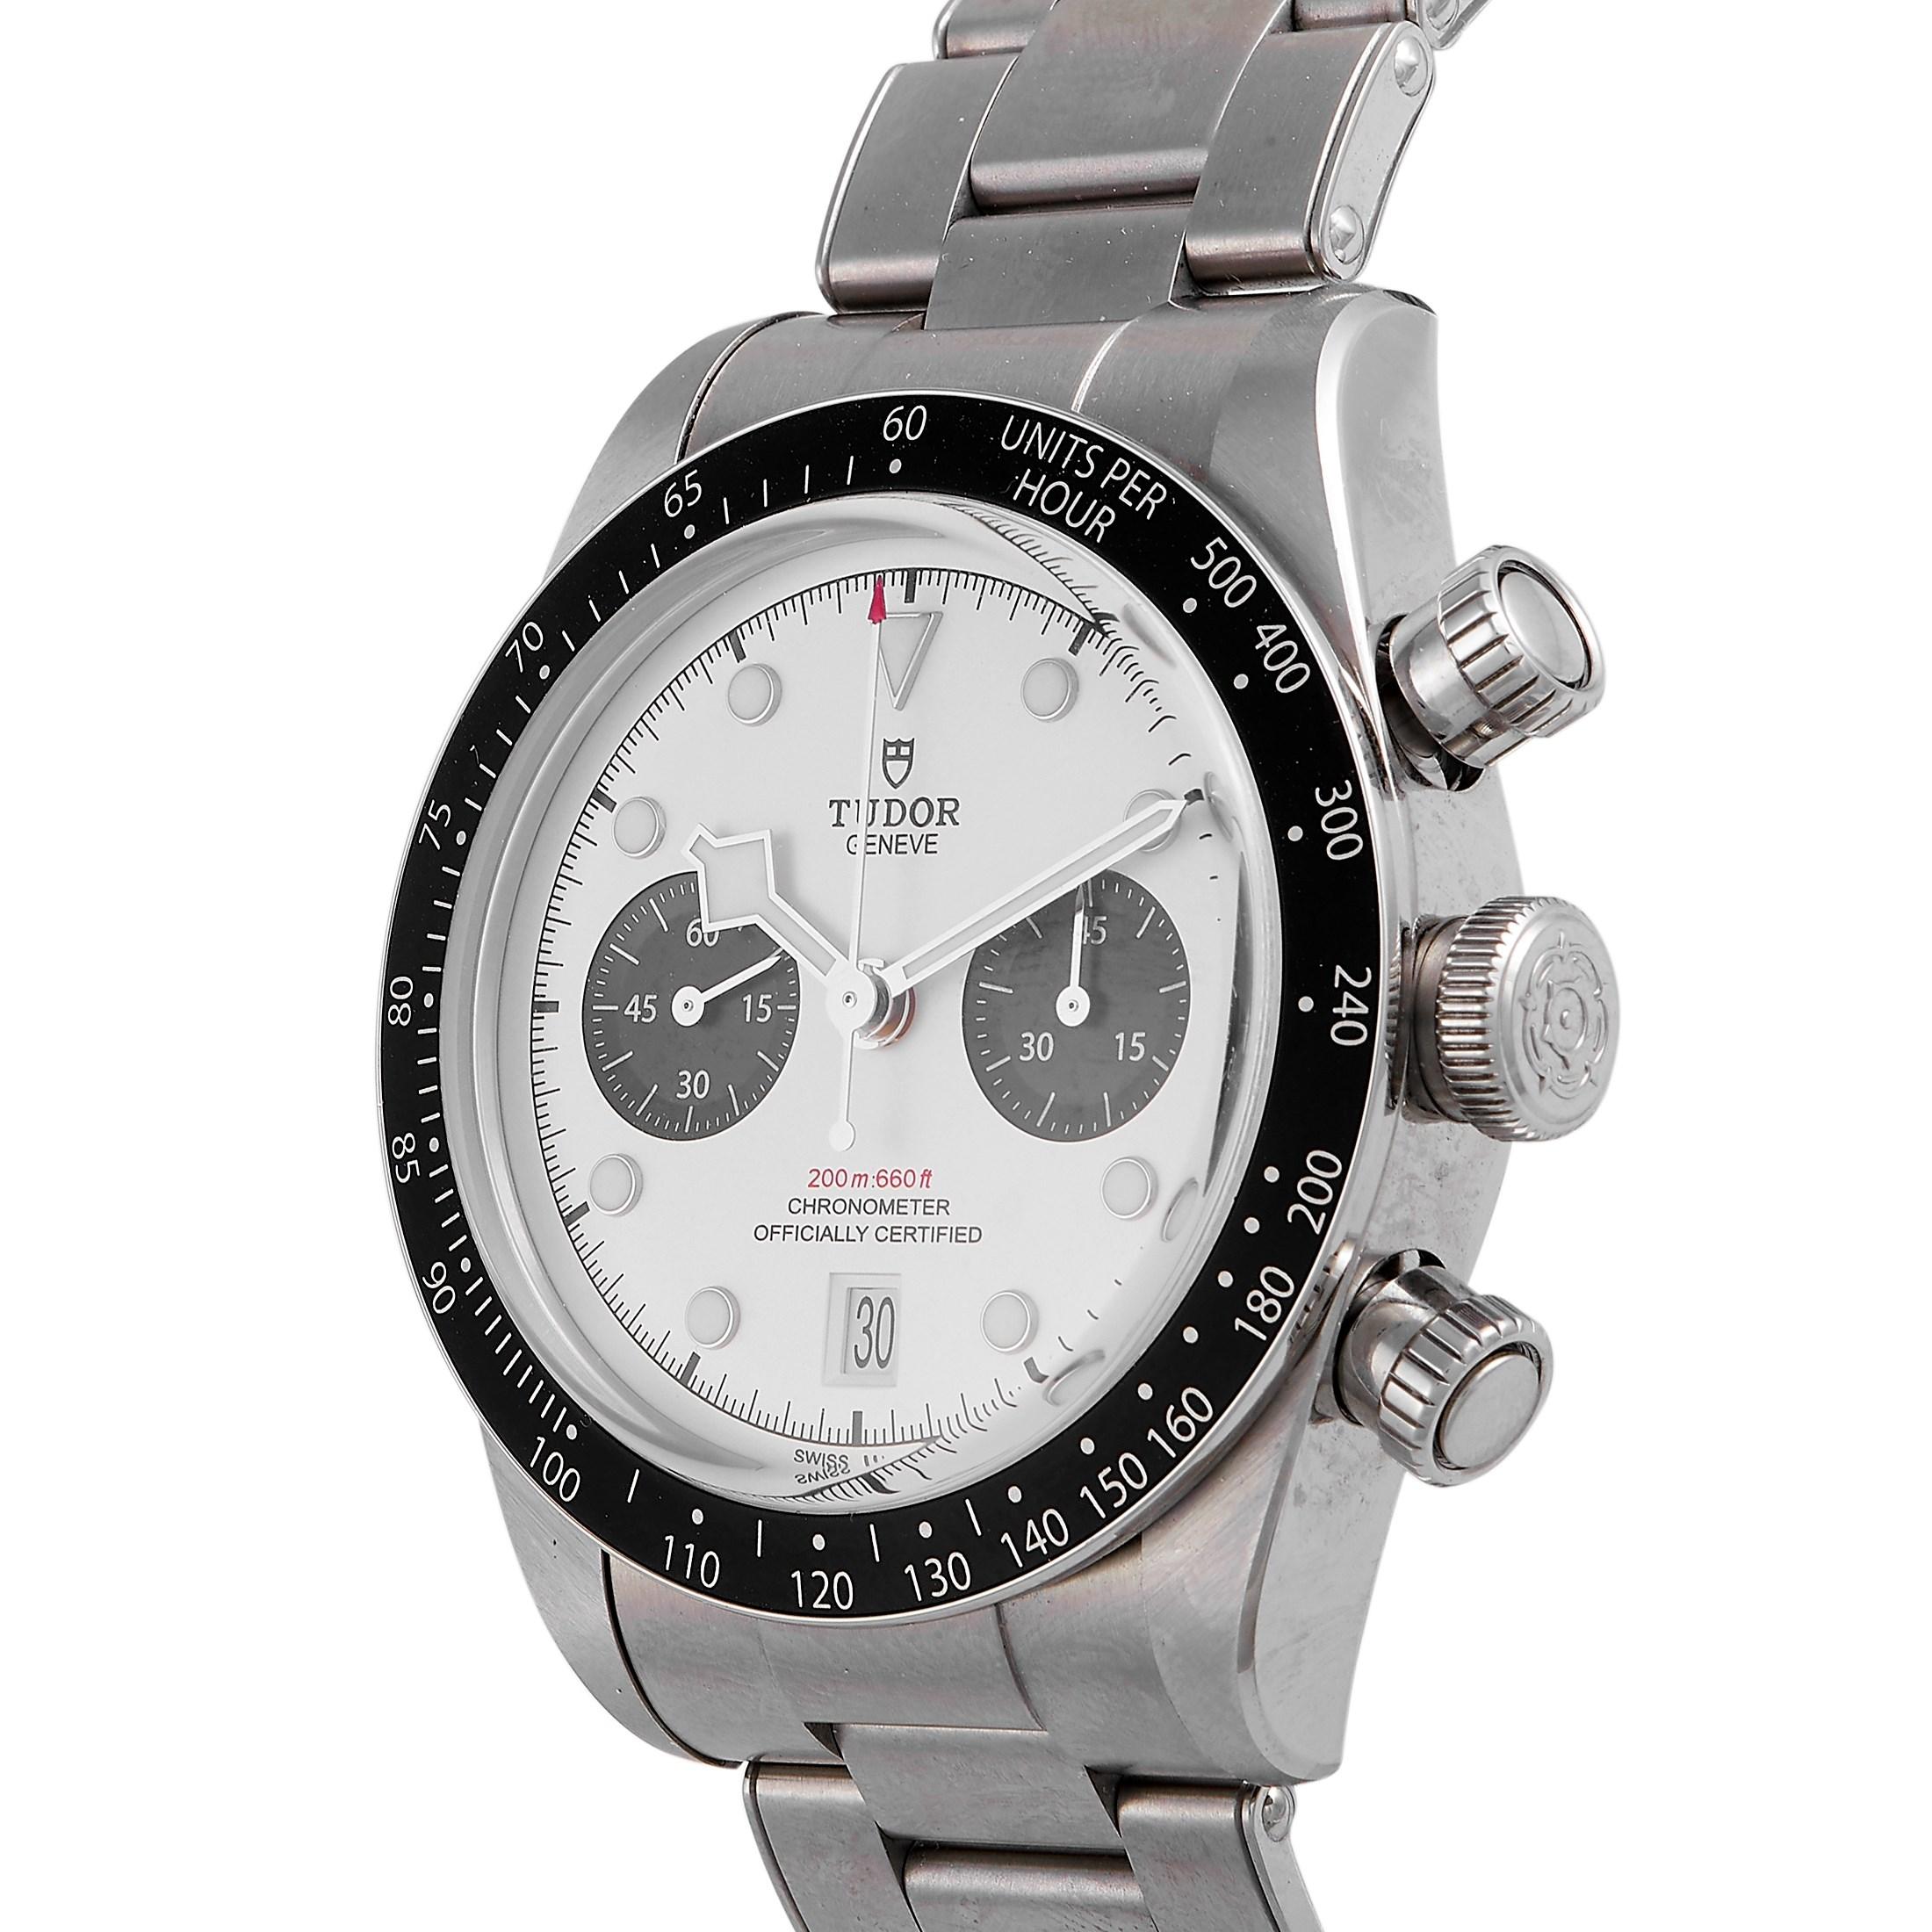 Neat, fashionable, and versatile, the Tudor Black Bay Panda Chronograph Watch M79360N-0002 is a worthy addition to any watch collection. This timepiece features a polished steel case with a classy 